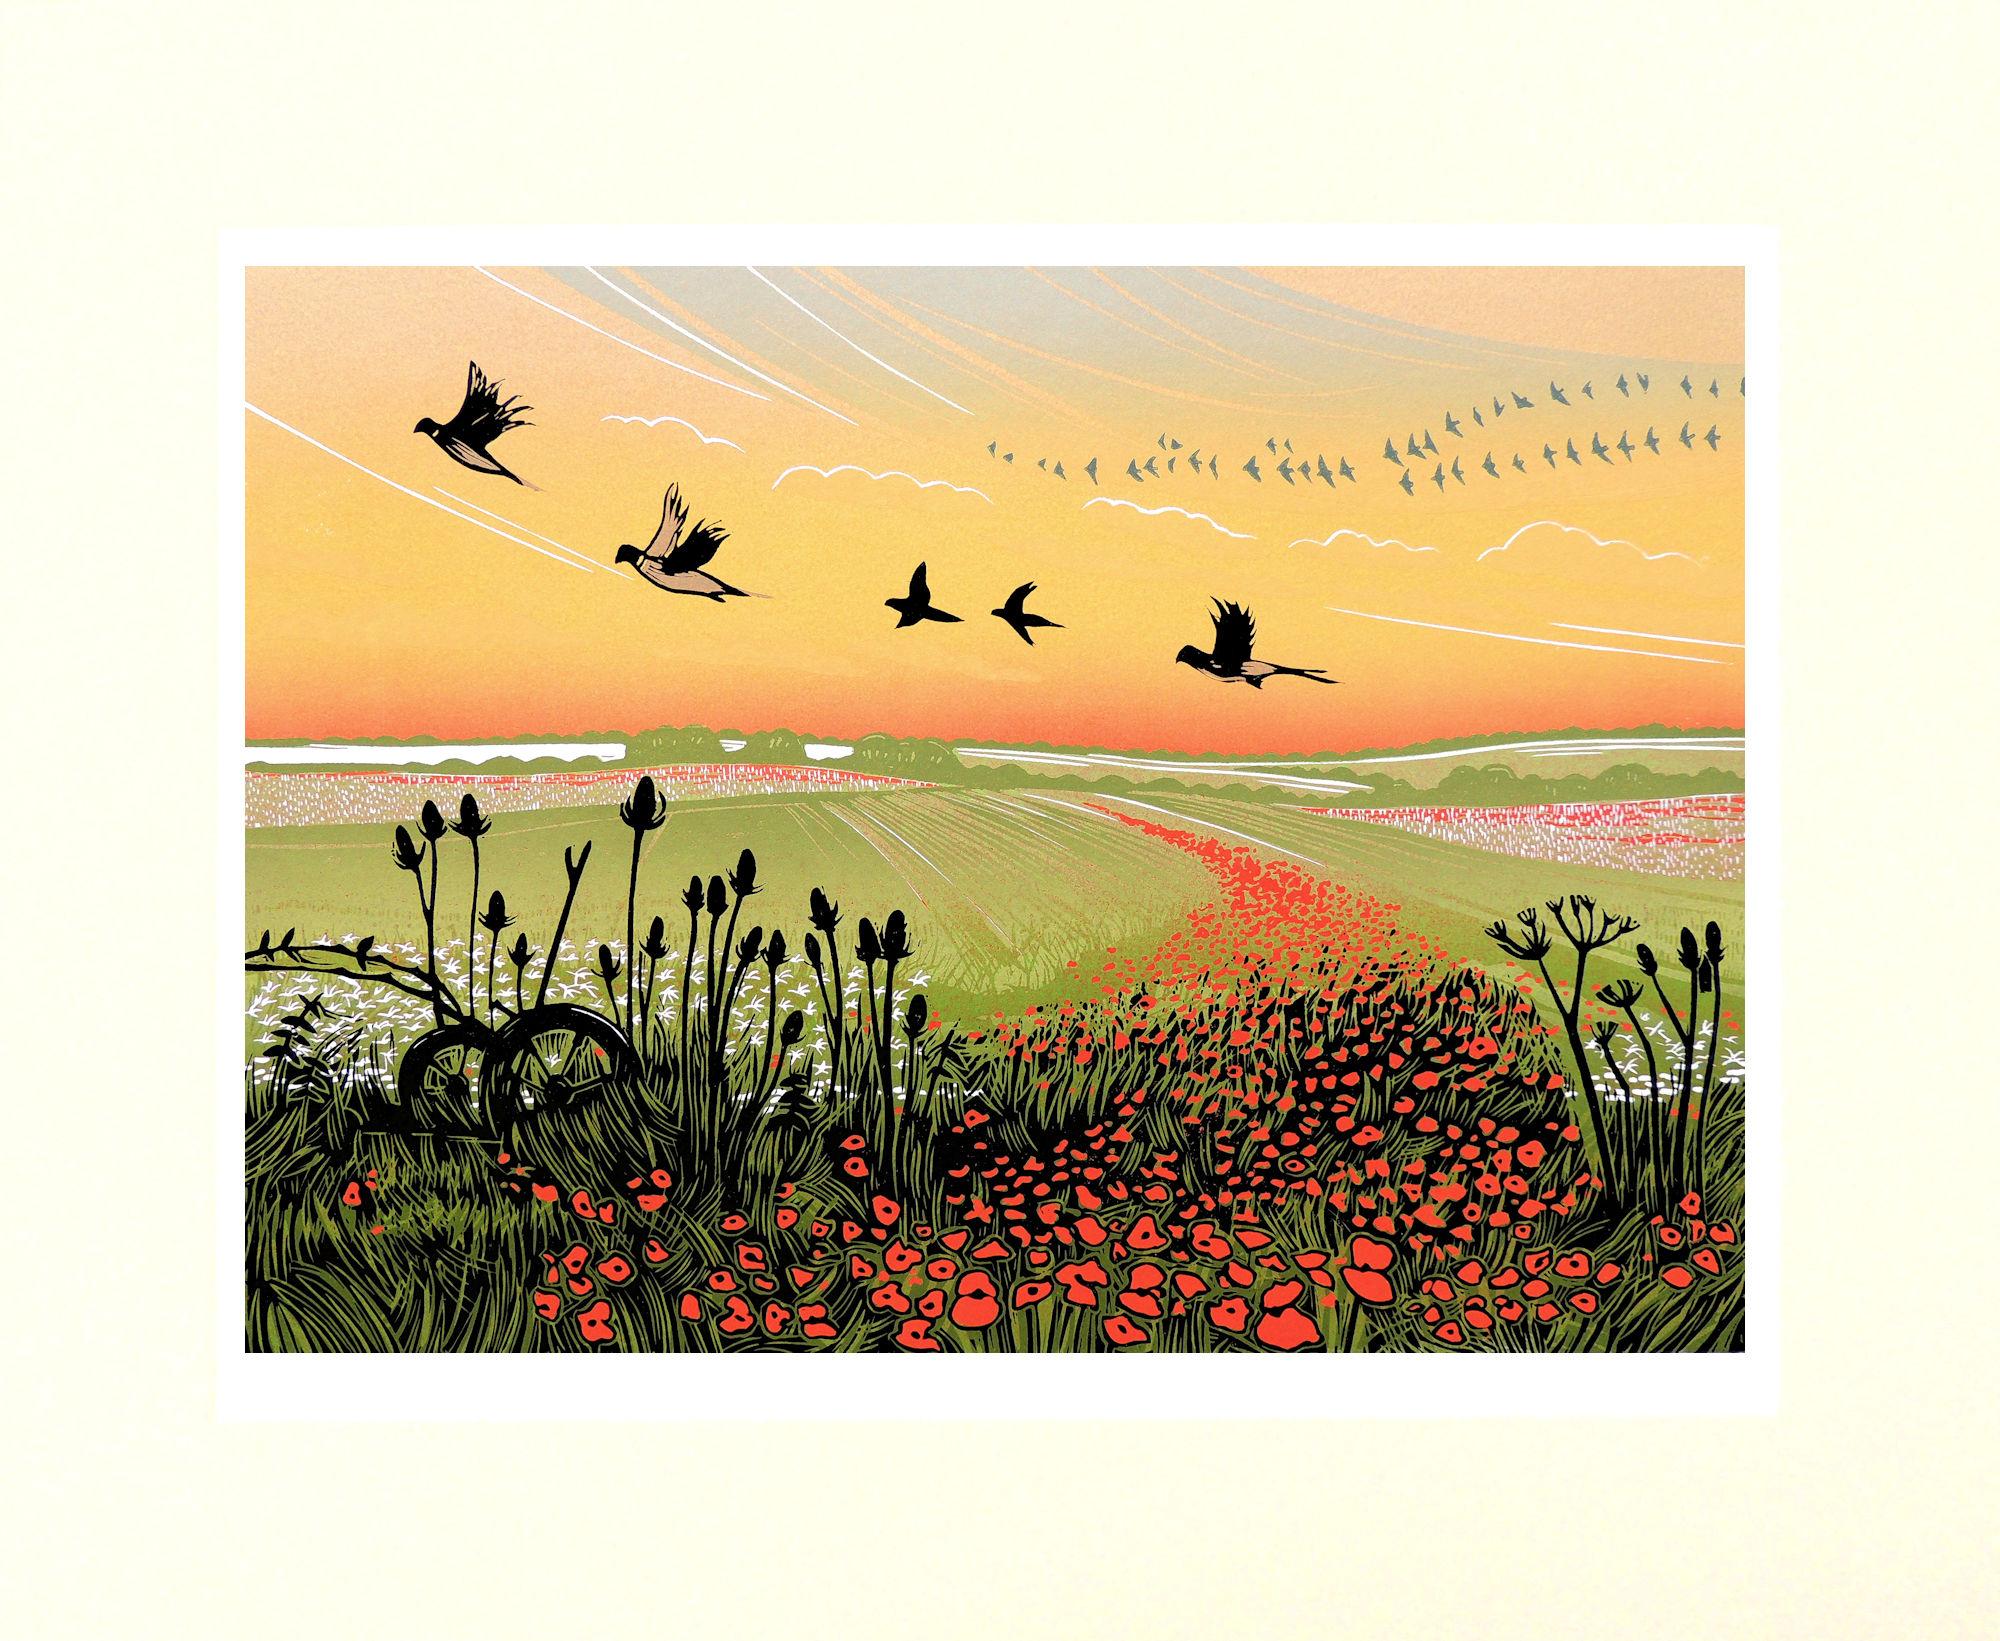 Flight Path By Rob Barnes

The inspiration for this came from looking across a poppy field and seeing pheasants taking flight. Where I live we are surrounded by fields full of wildlife and have pheasants visiting the back garden. I love the time of